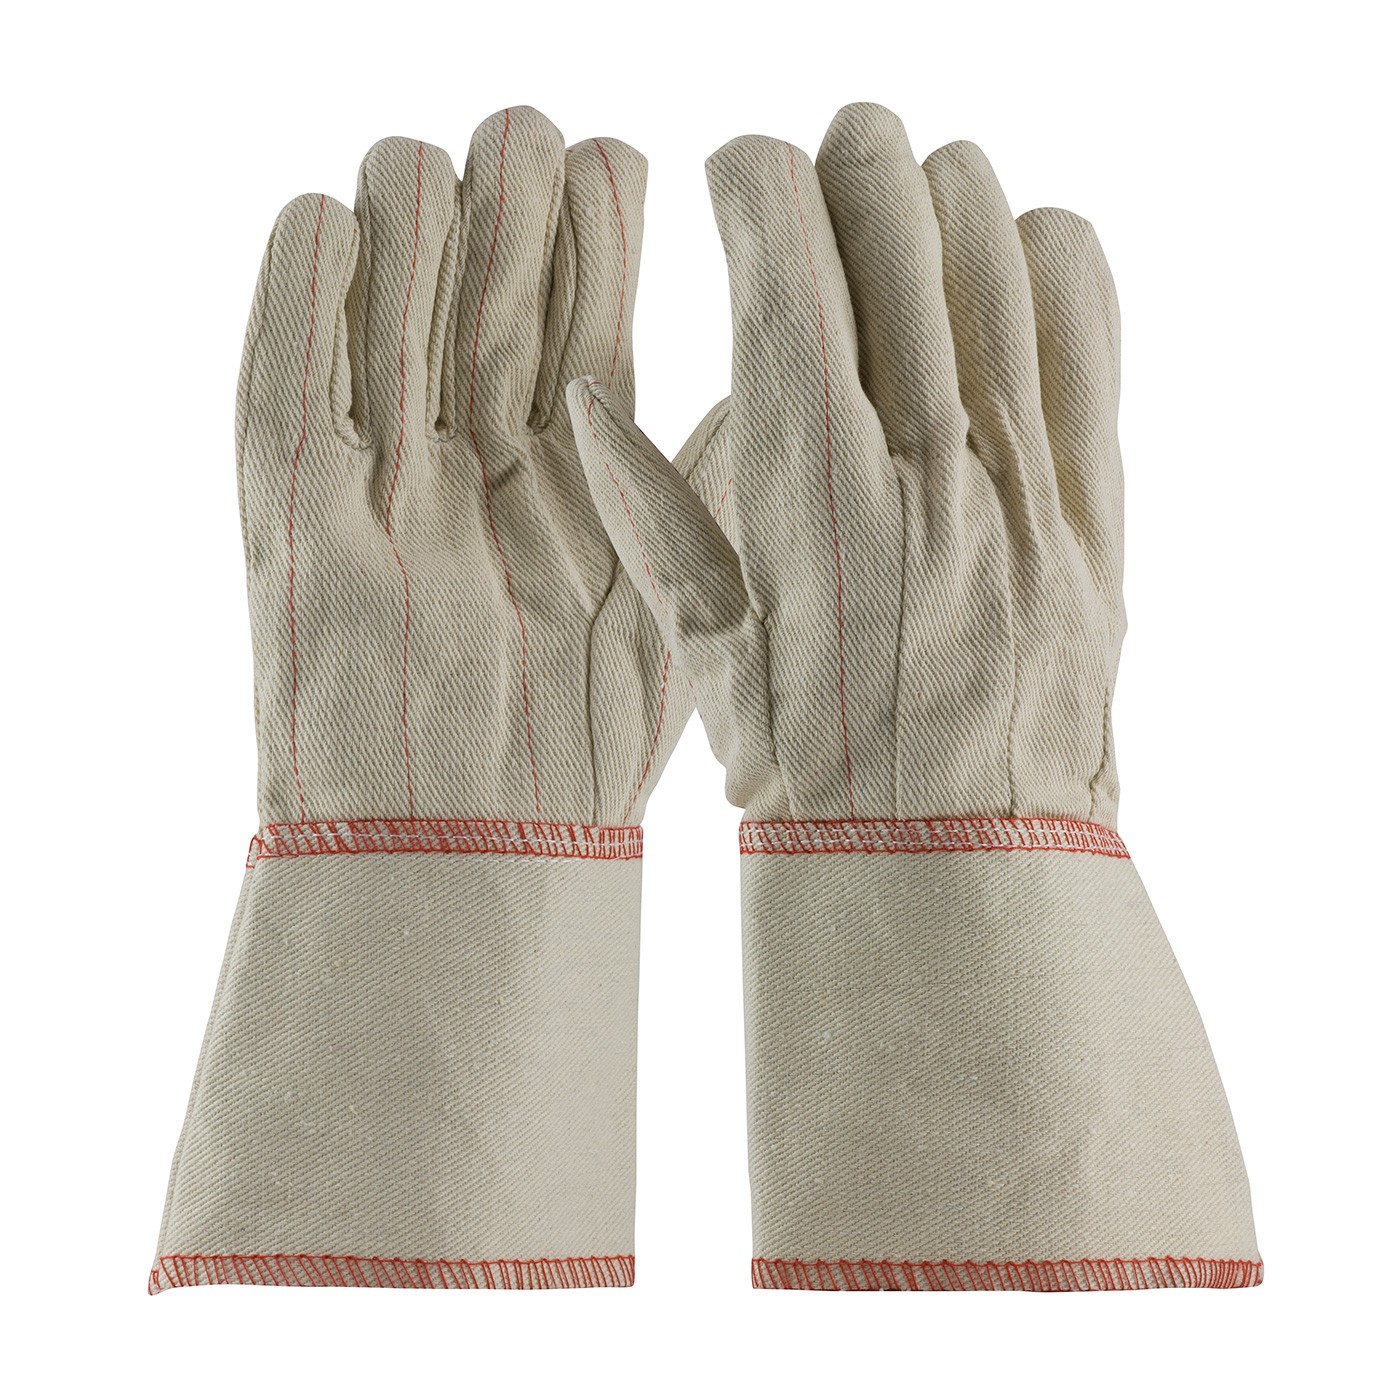 PIP® Cotton Canvas Double Palm Glove with Nap-in Finish - Gauntlet Cuff  (#92-918G)